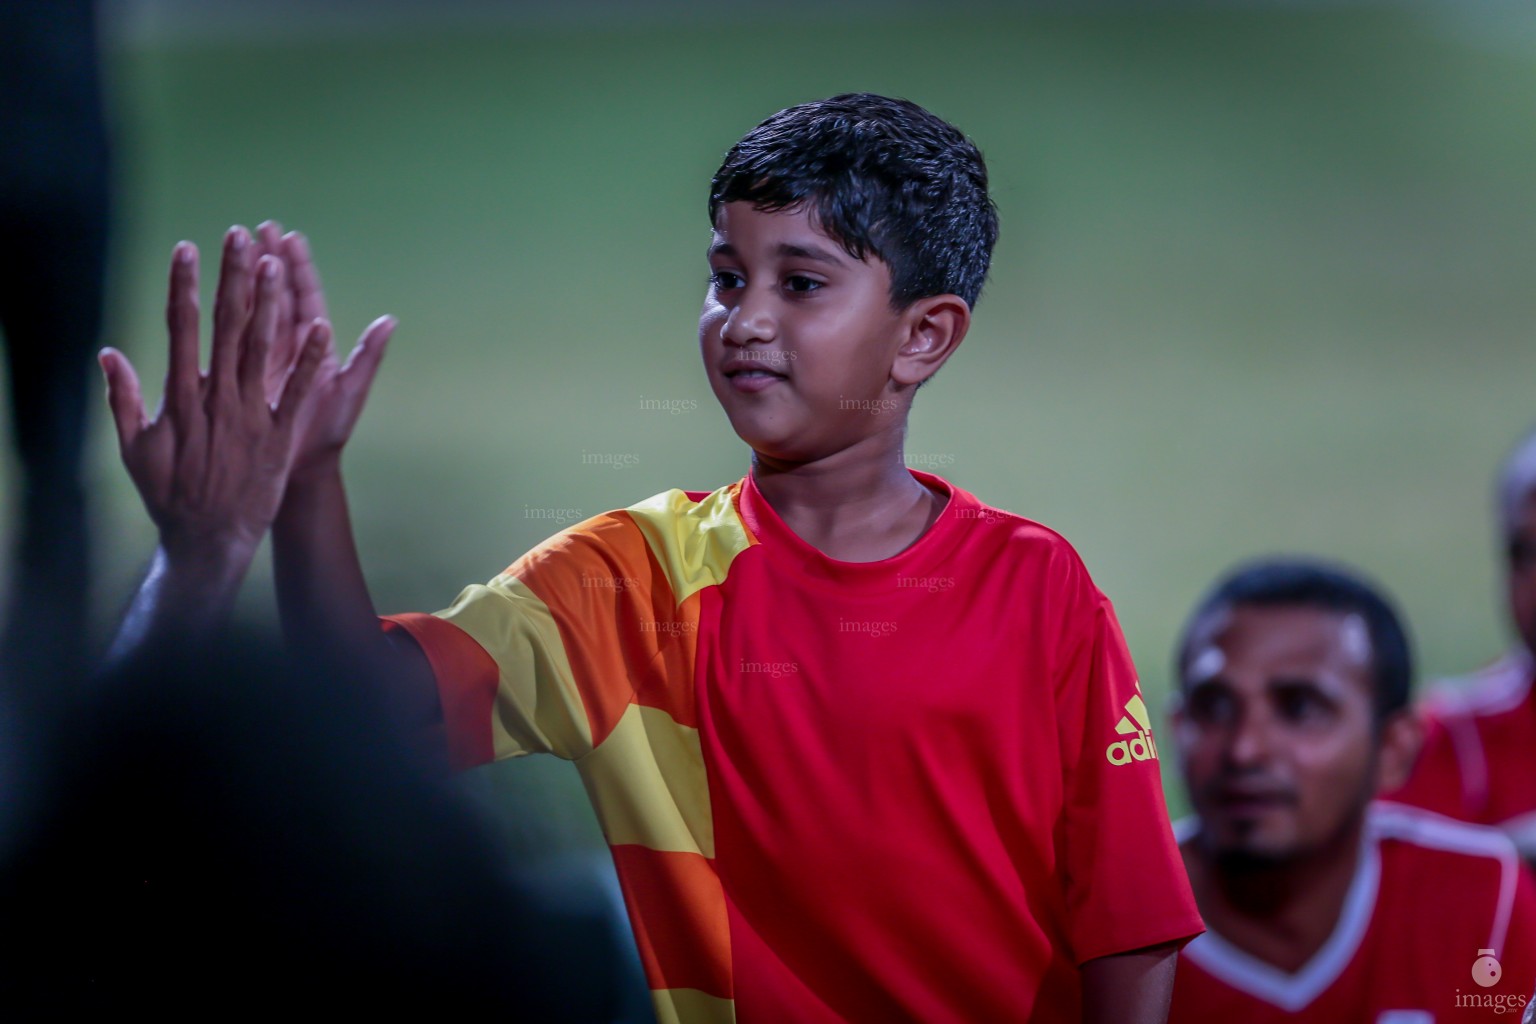 Charity Match played to Raise Funds for Rohingya